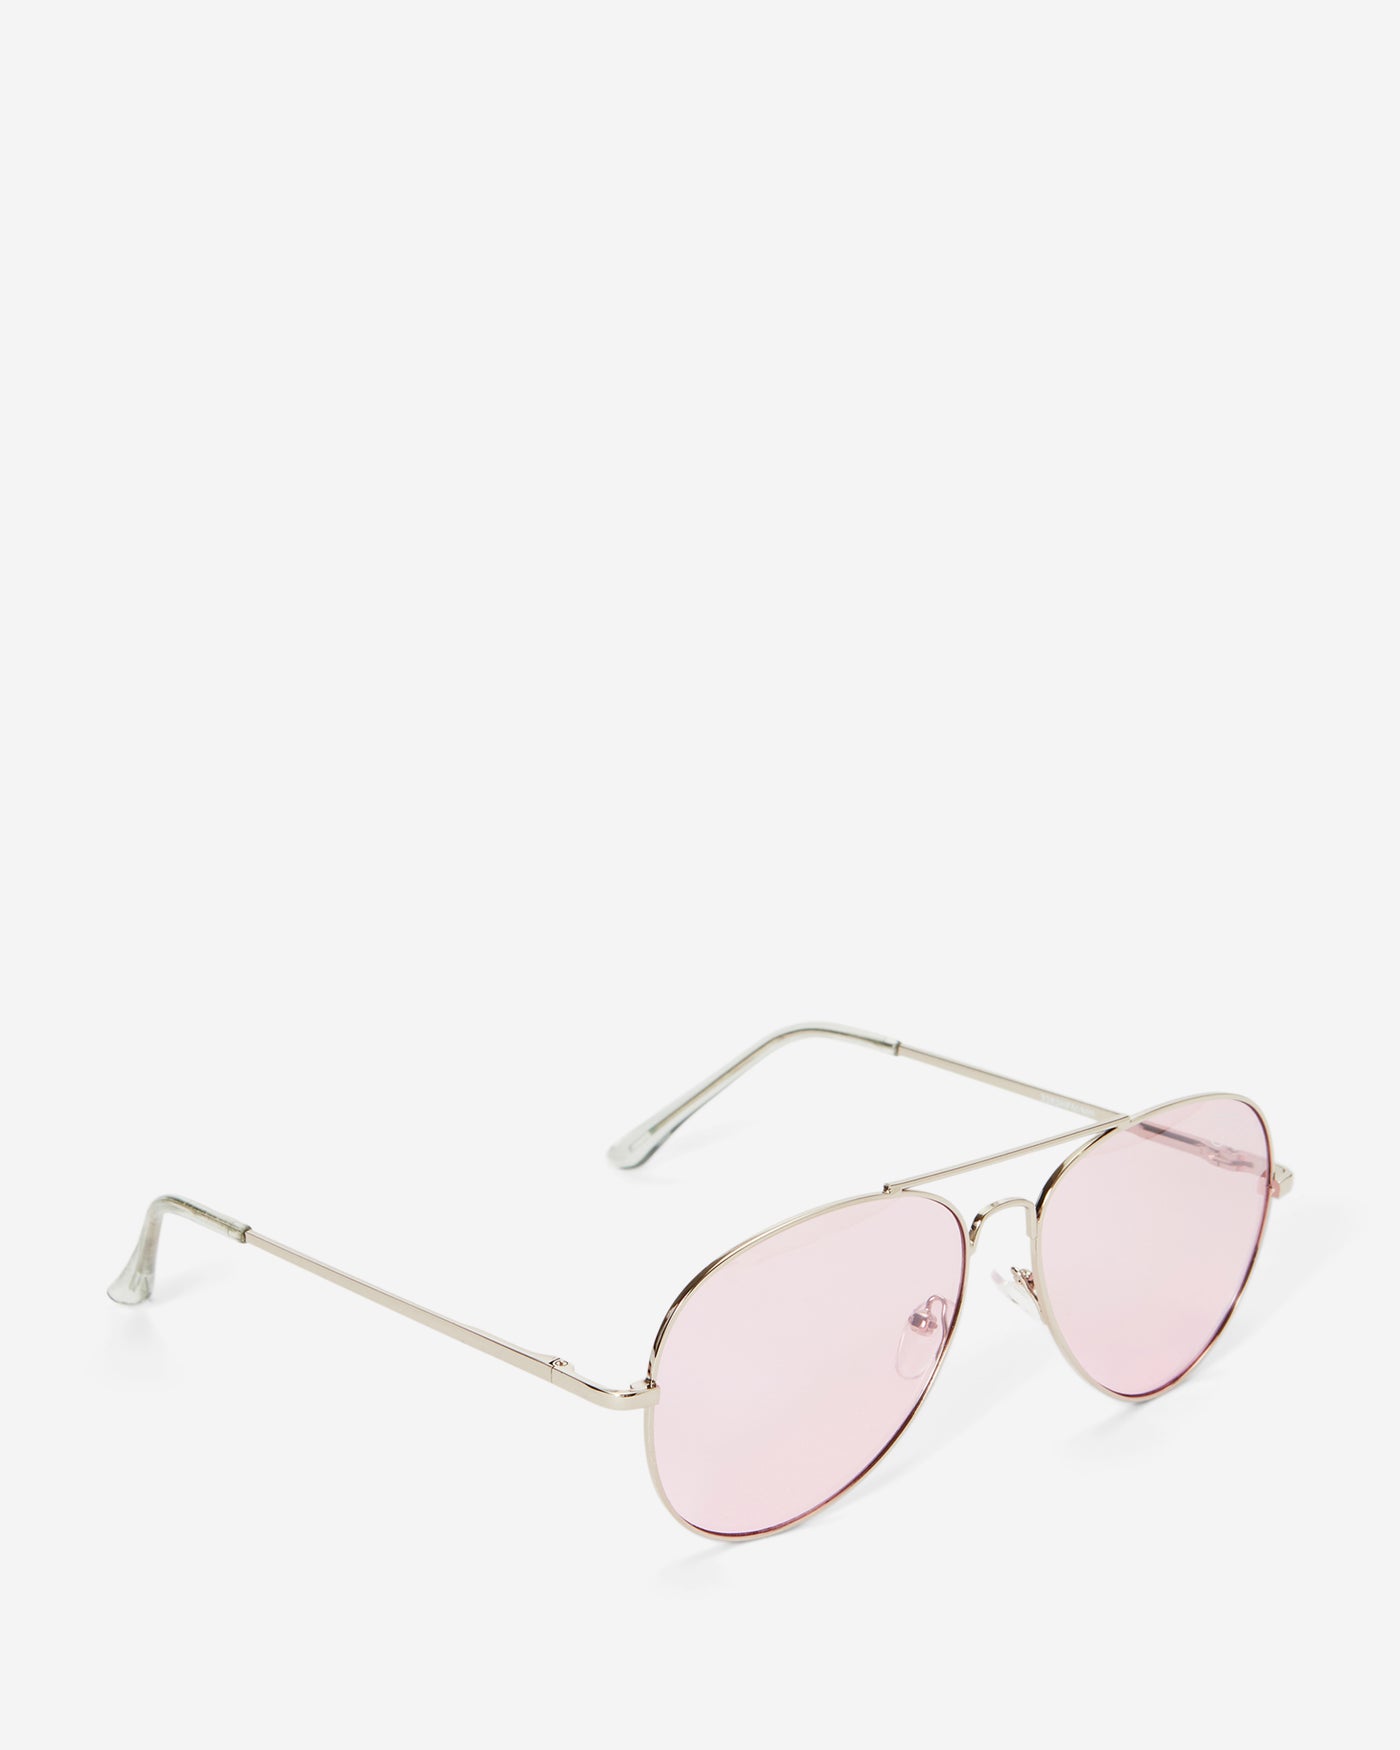 Classic Aviator Sunglasses - Light Gold Metal Frame with Pink Lens Sunglasses Joey James, The Label   